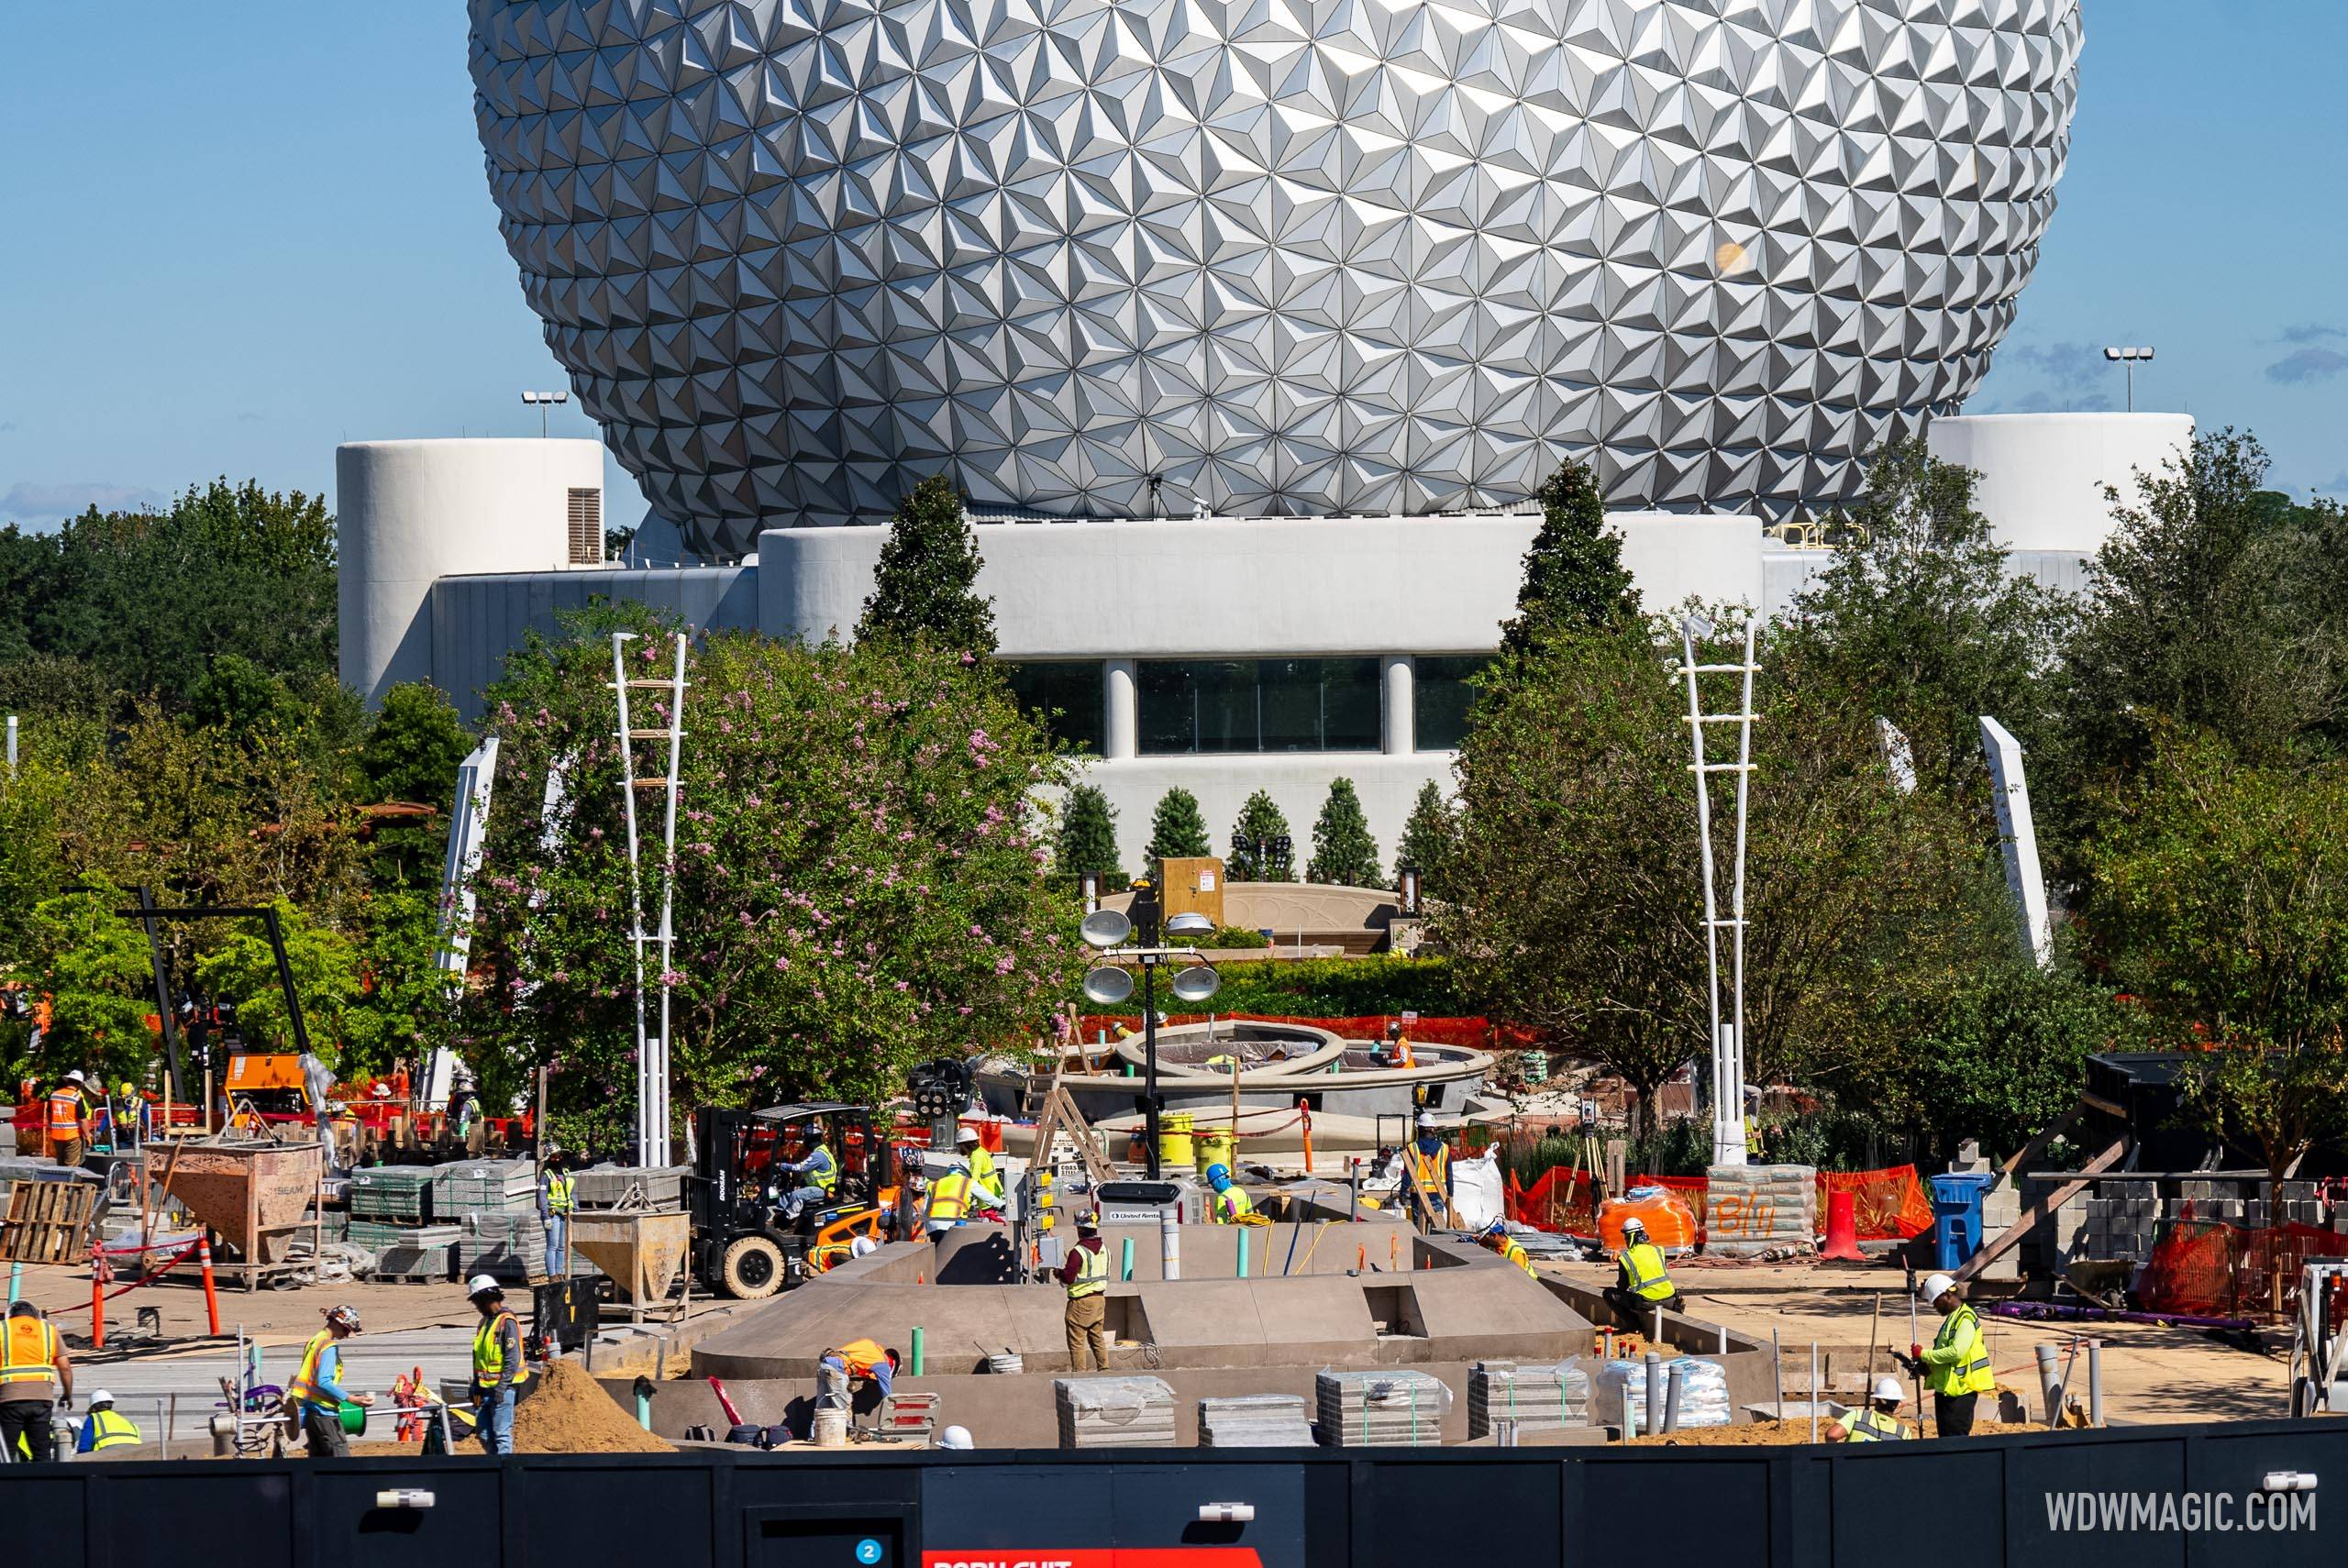 Latest look at EPCOT's World Celebration construction progress and the likely arrival of the Walt Disney statue at Dreamers Point